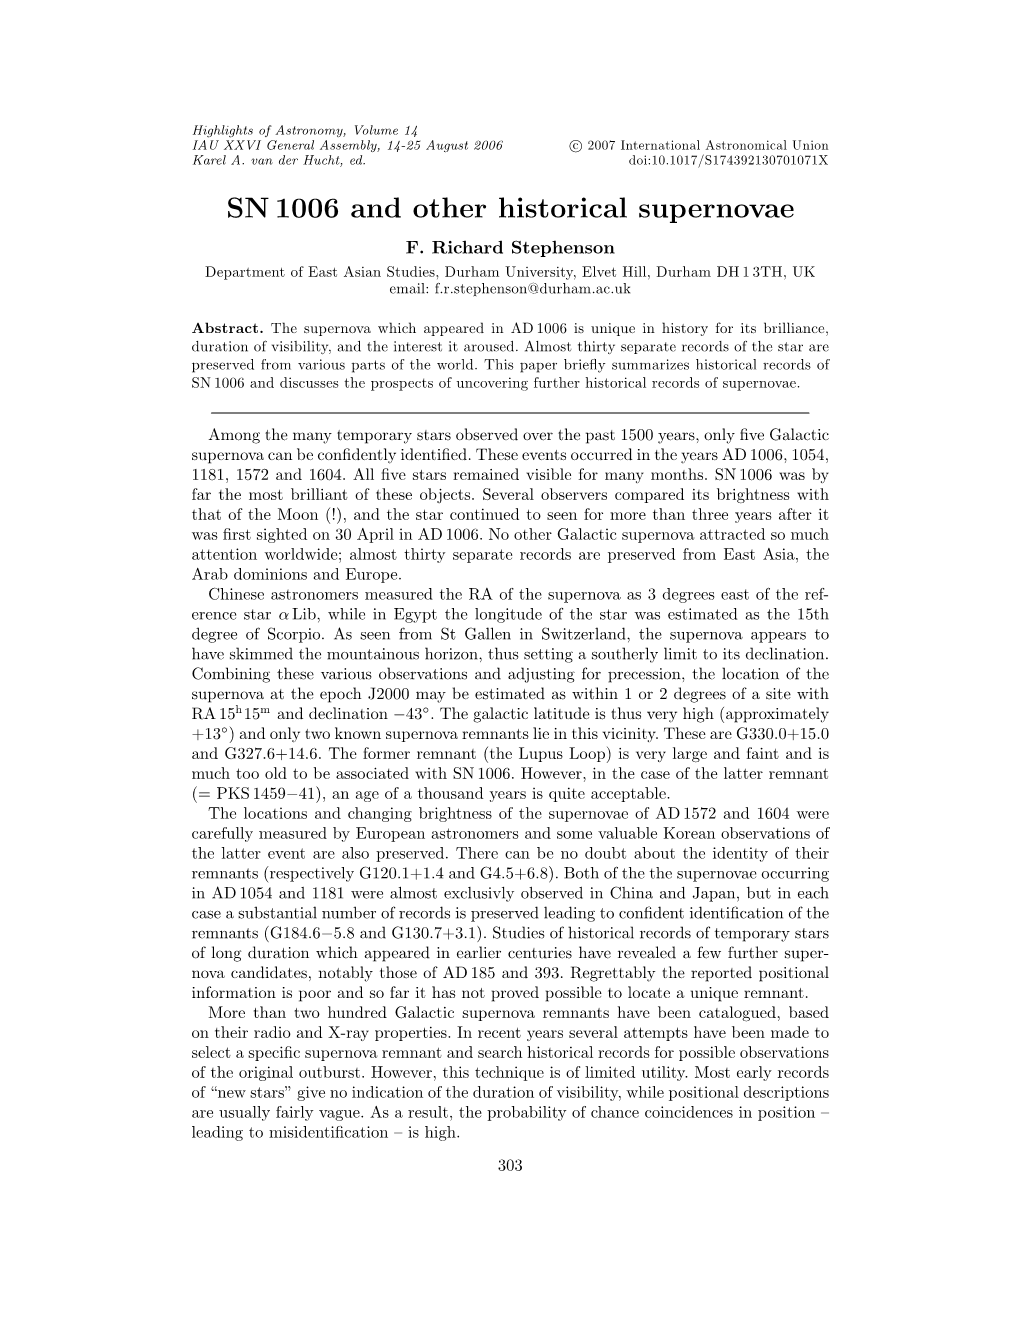 SN 1006 and Other Historical Supernovae F